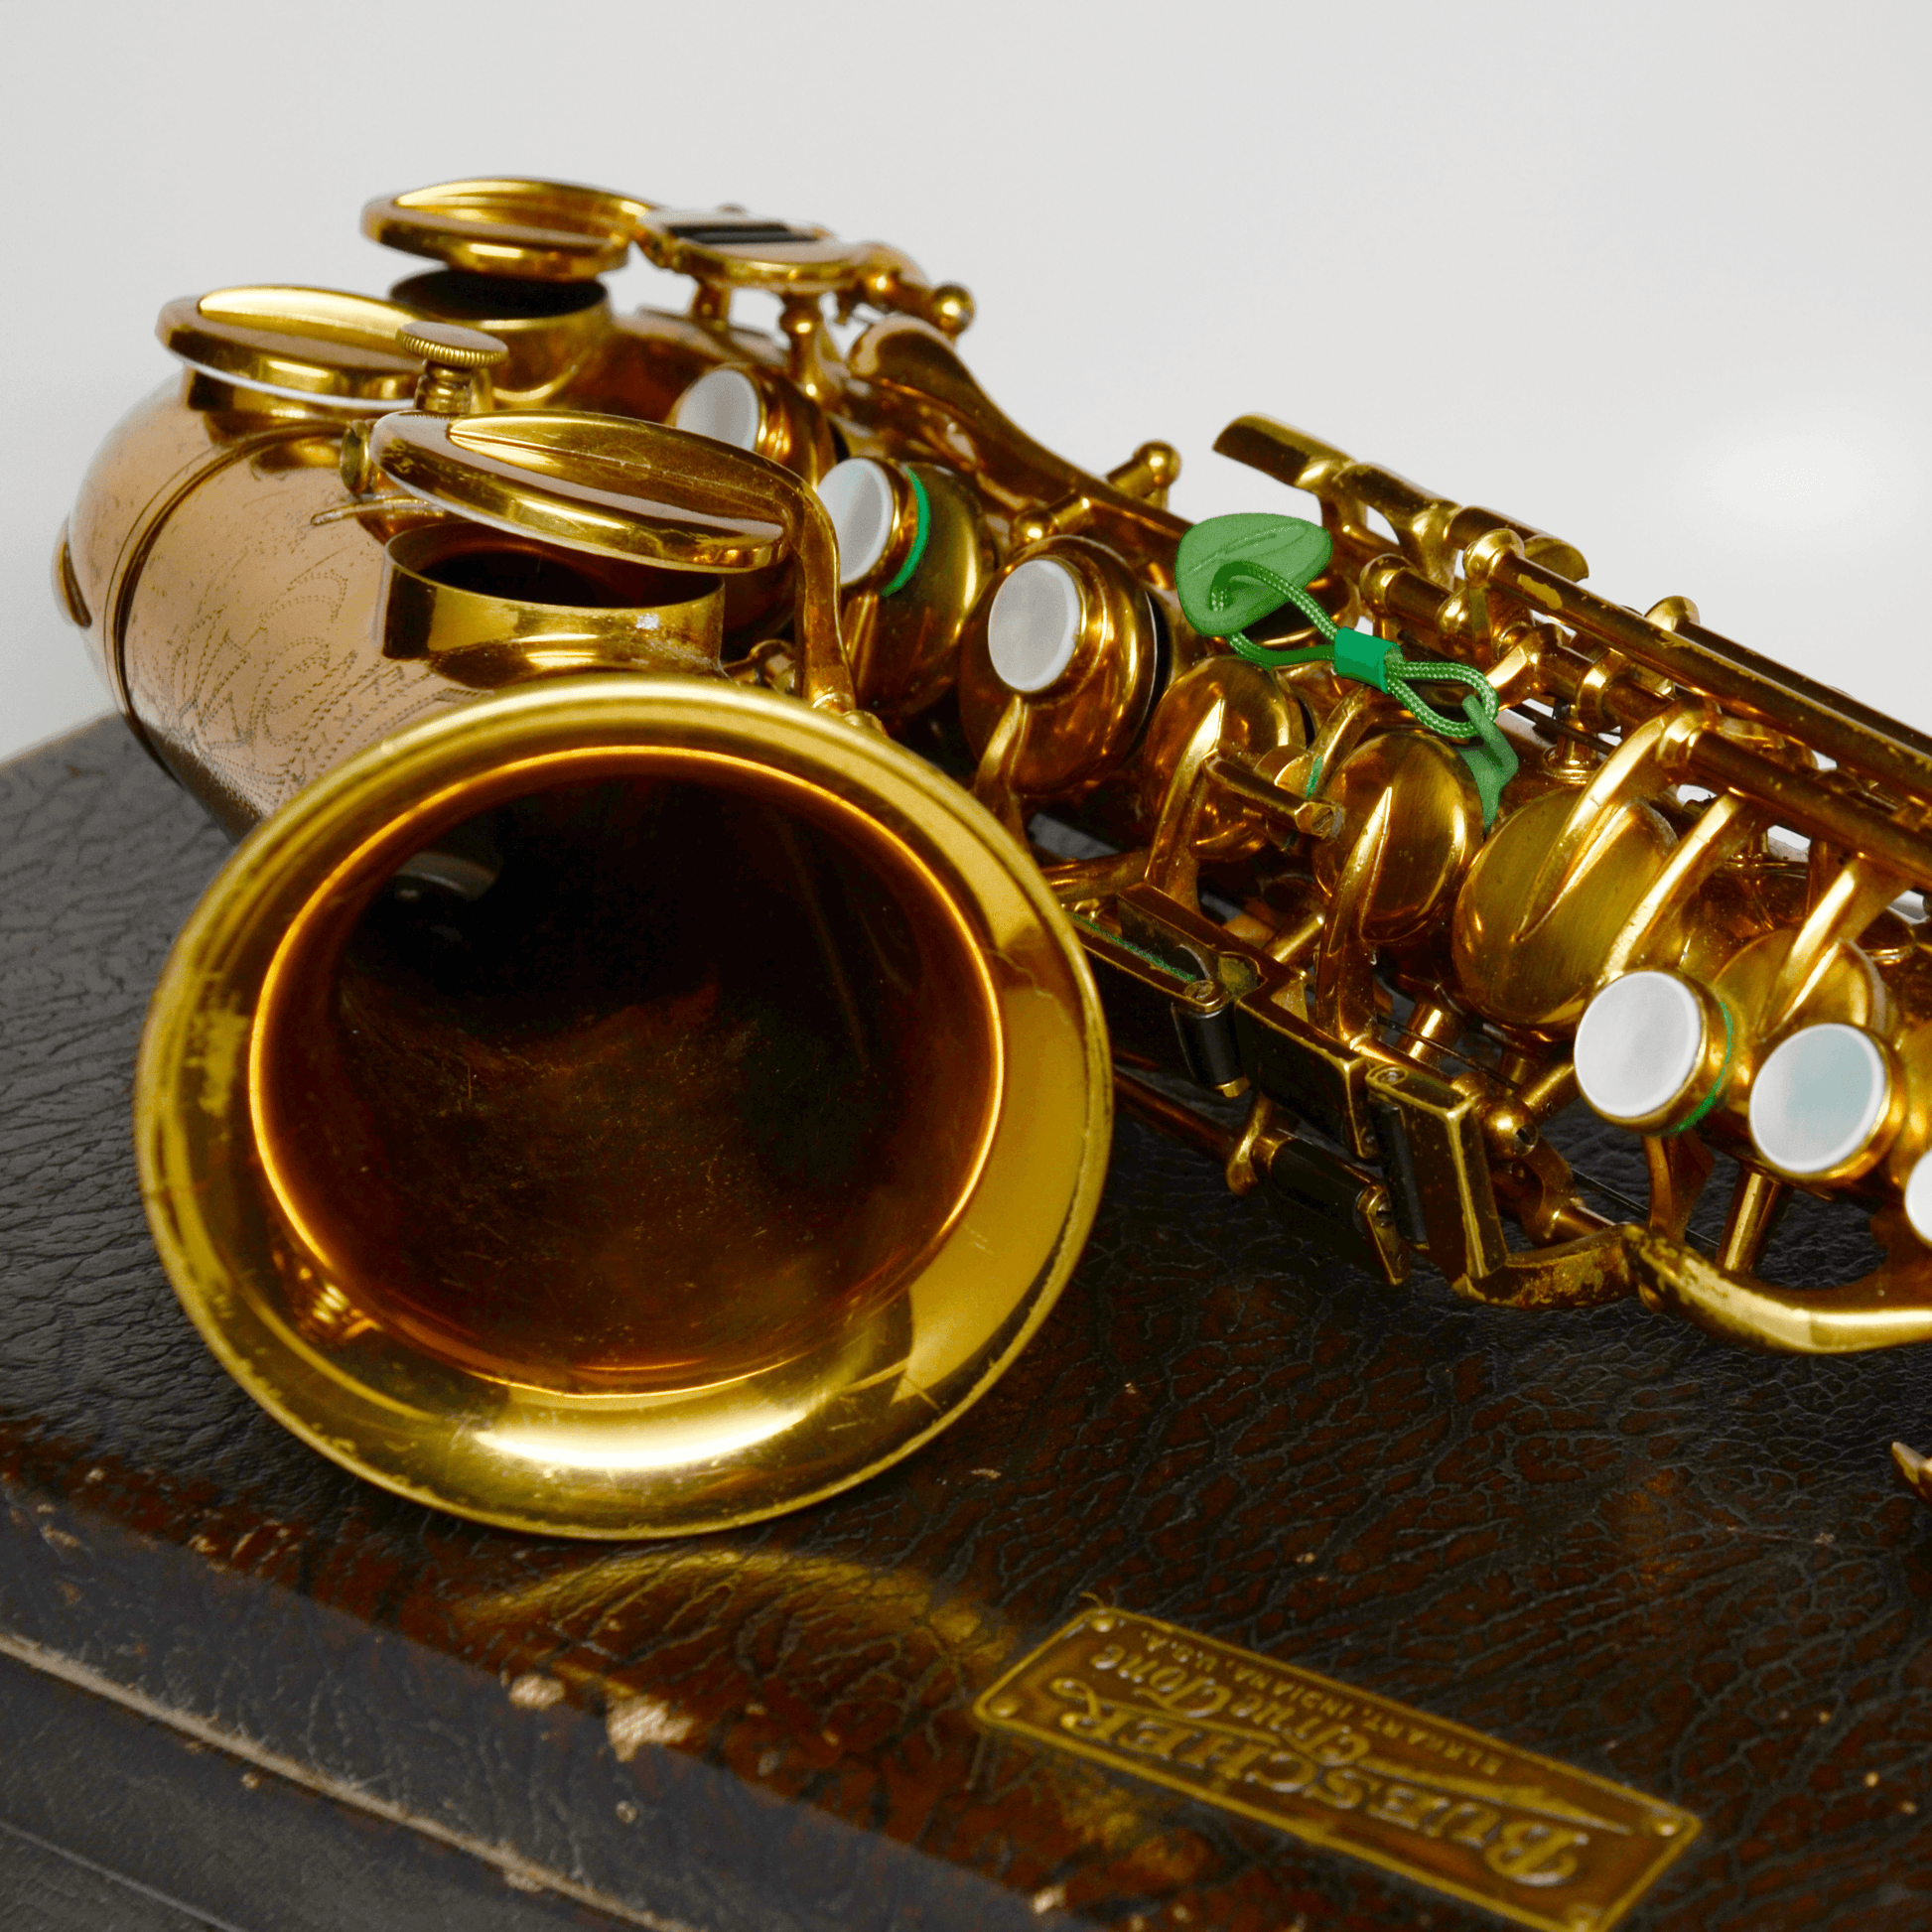 Key Leaves for vintage soprano sax cure sticky G sharp key and prevent pad rot. Shown here on a Buescher curved soprano sax.